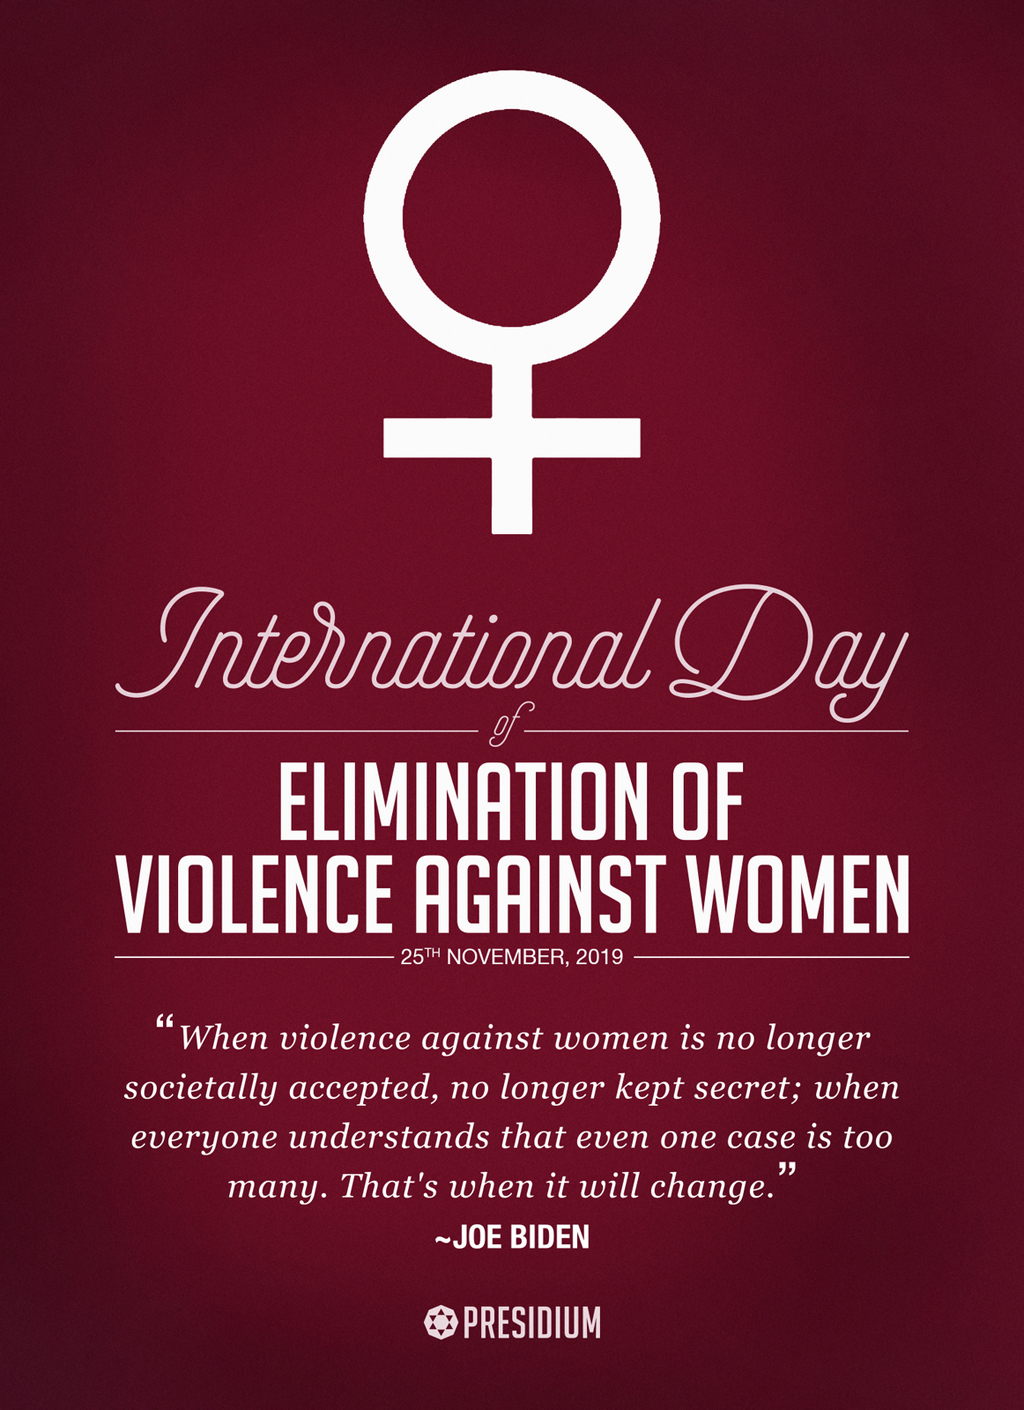 LET’S TAKE A STAND AGAINST ACTS OF VIOLENCE OF ANY FORM ON WOMEN